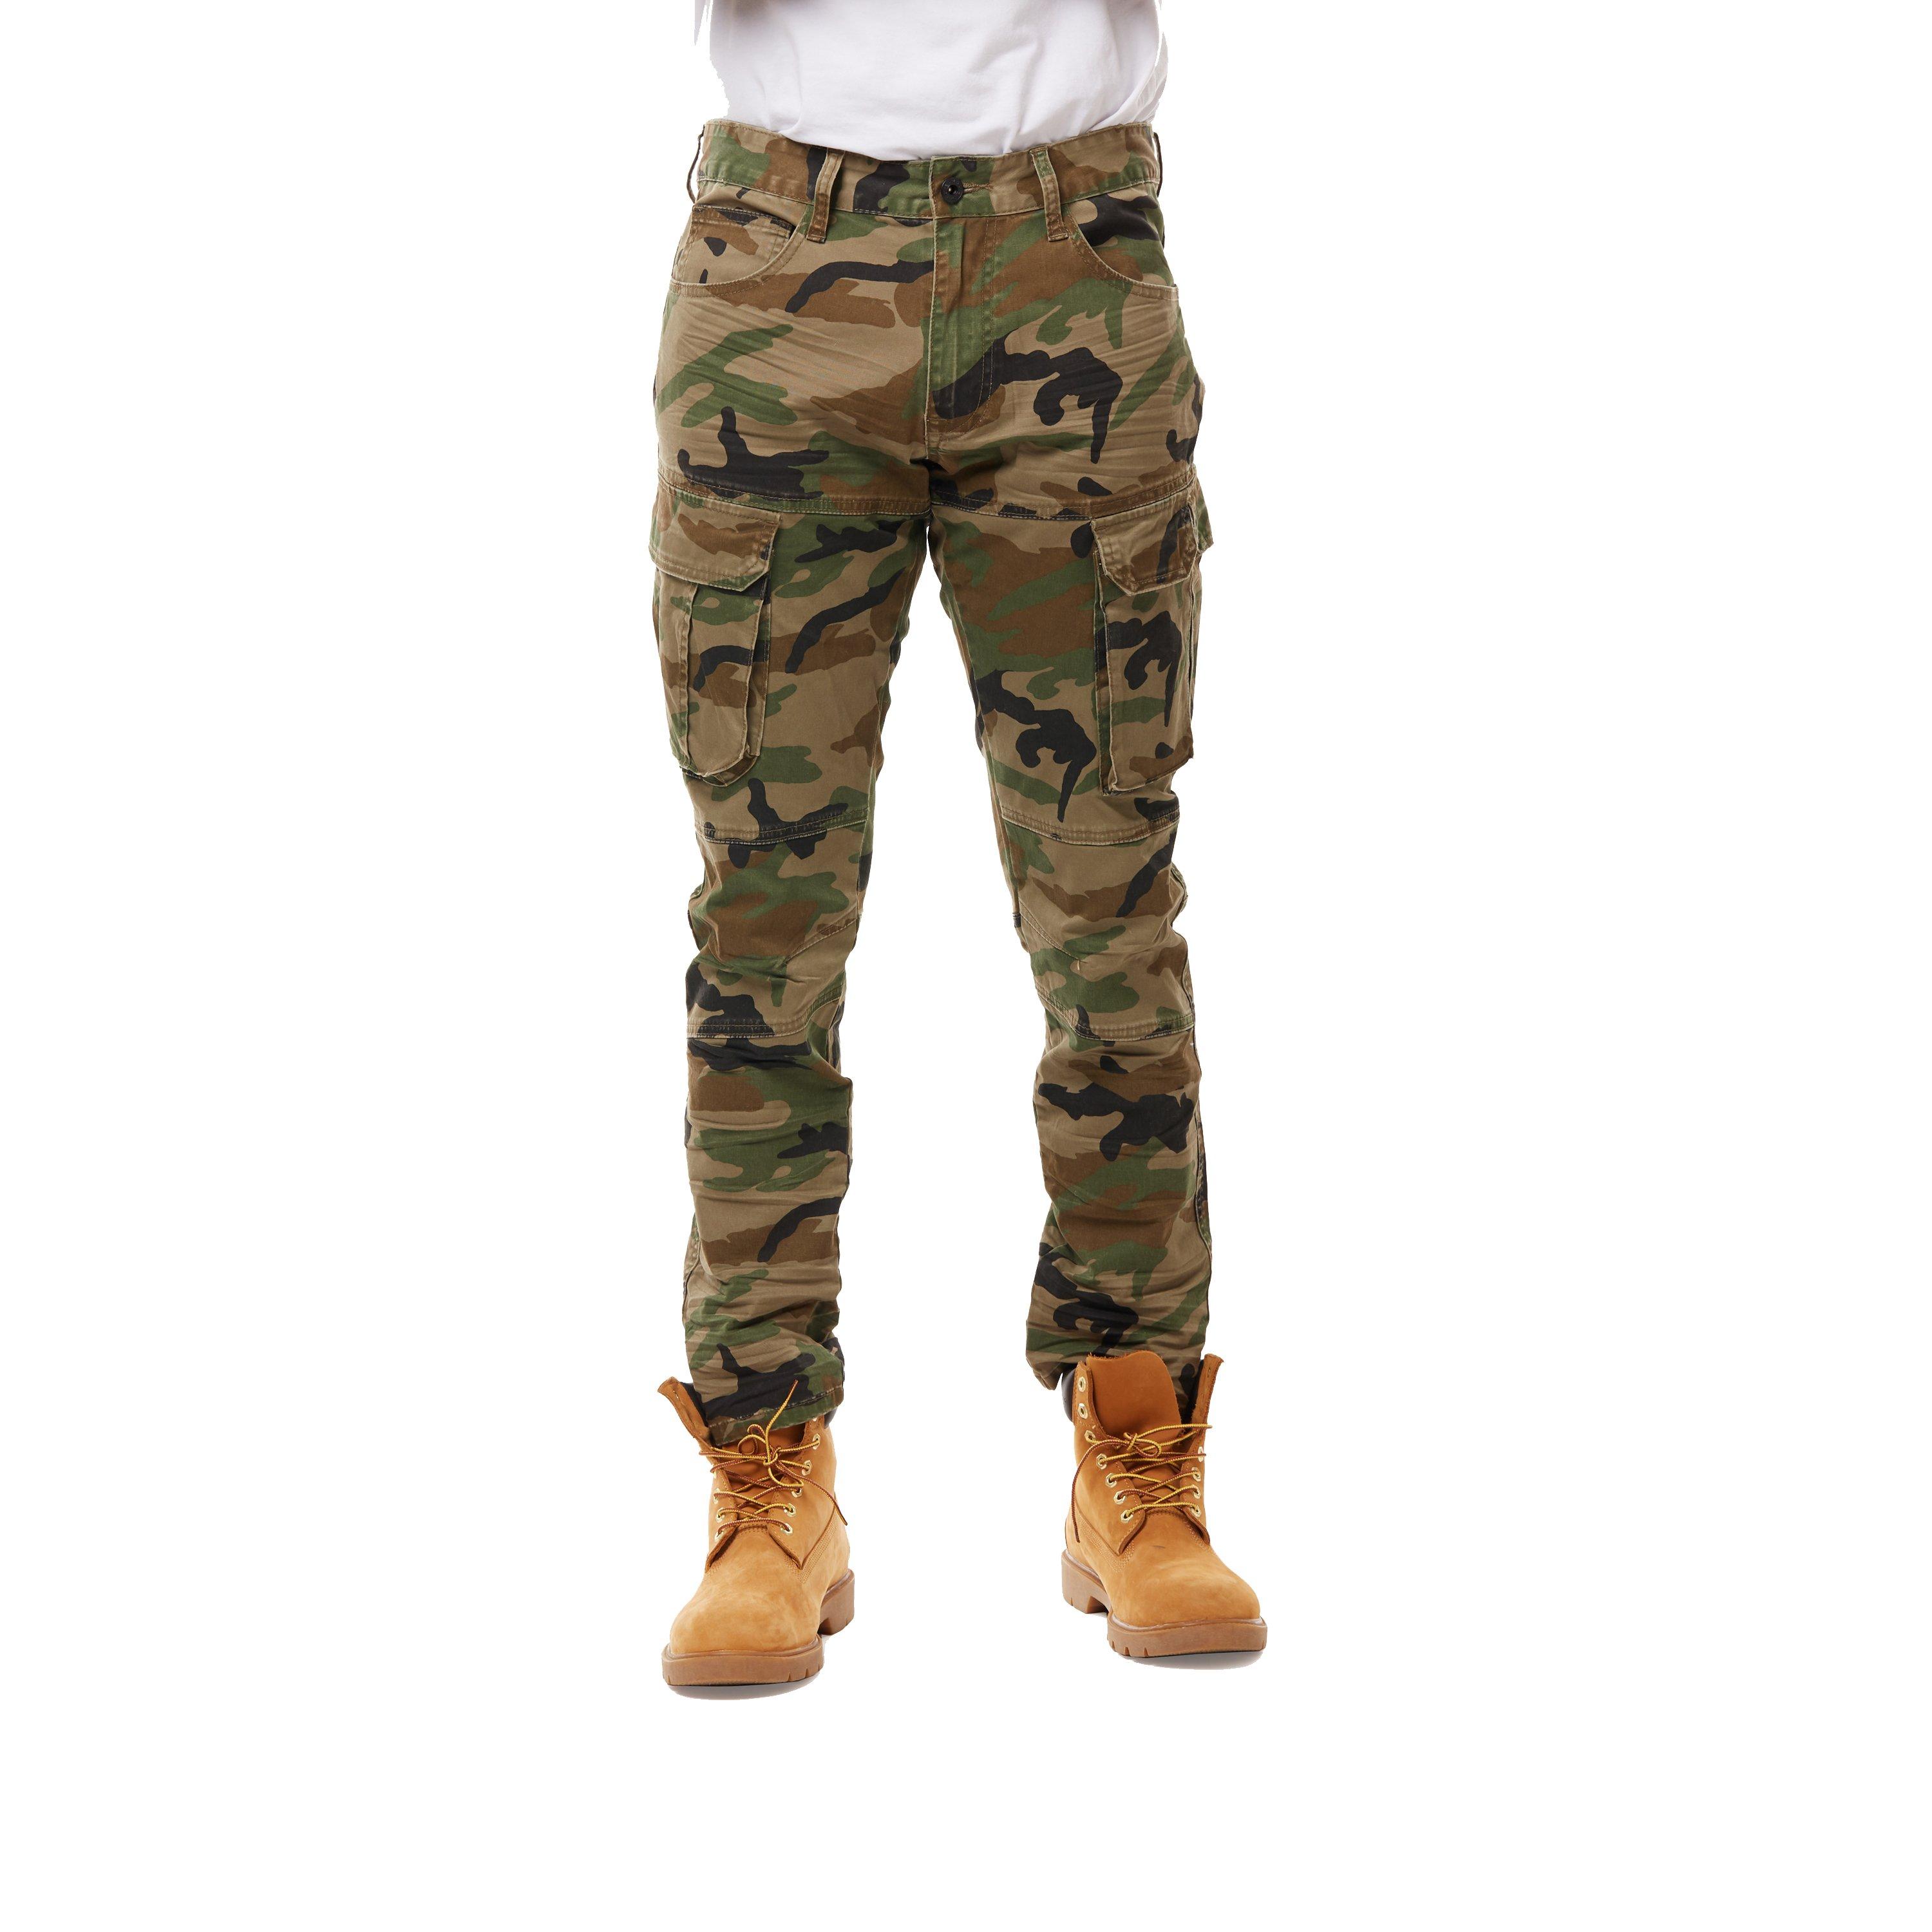 Camouflage Pants For Men | lupon.gov.ph